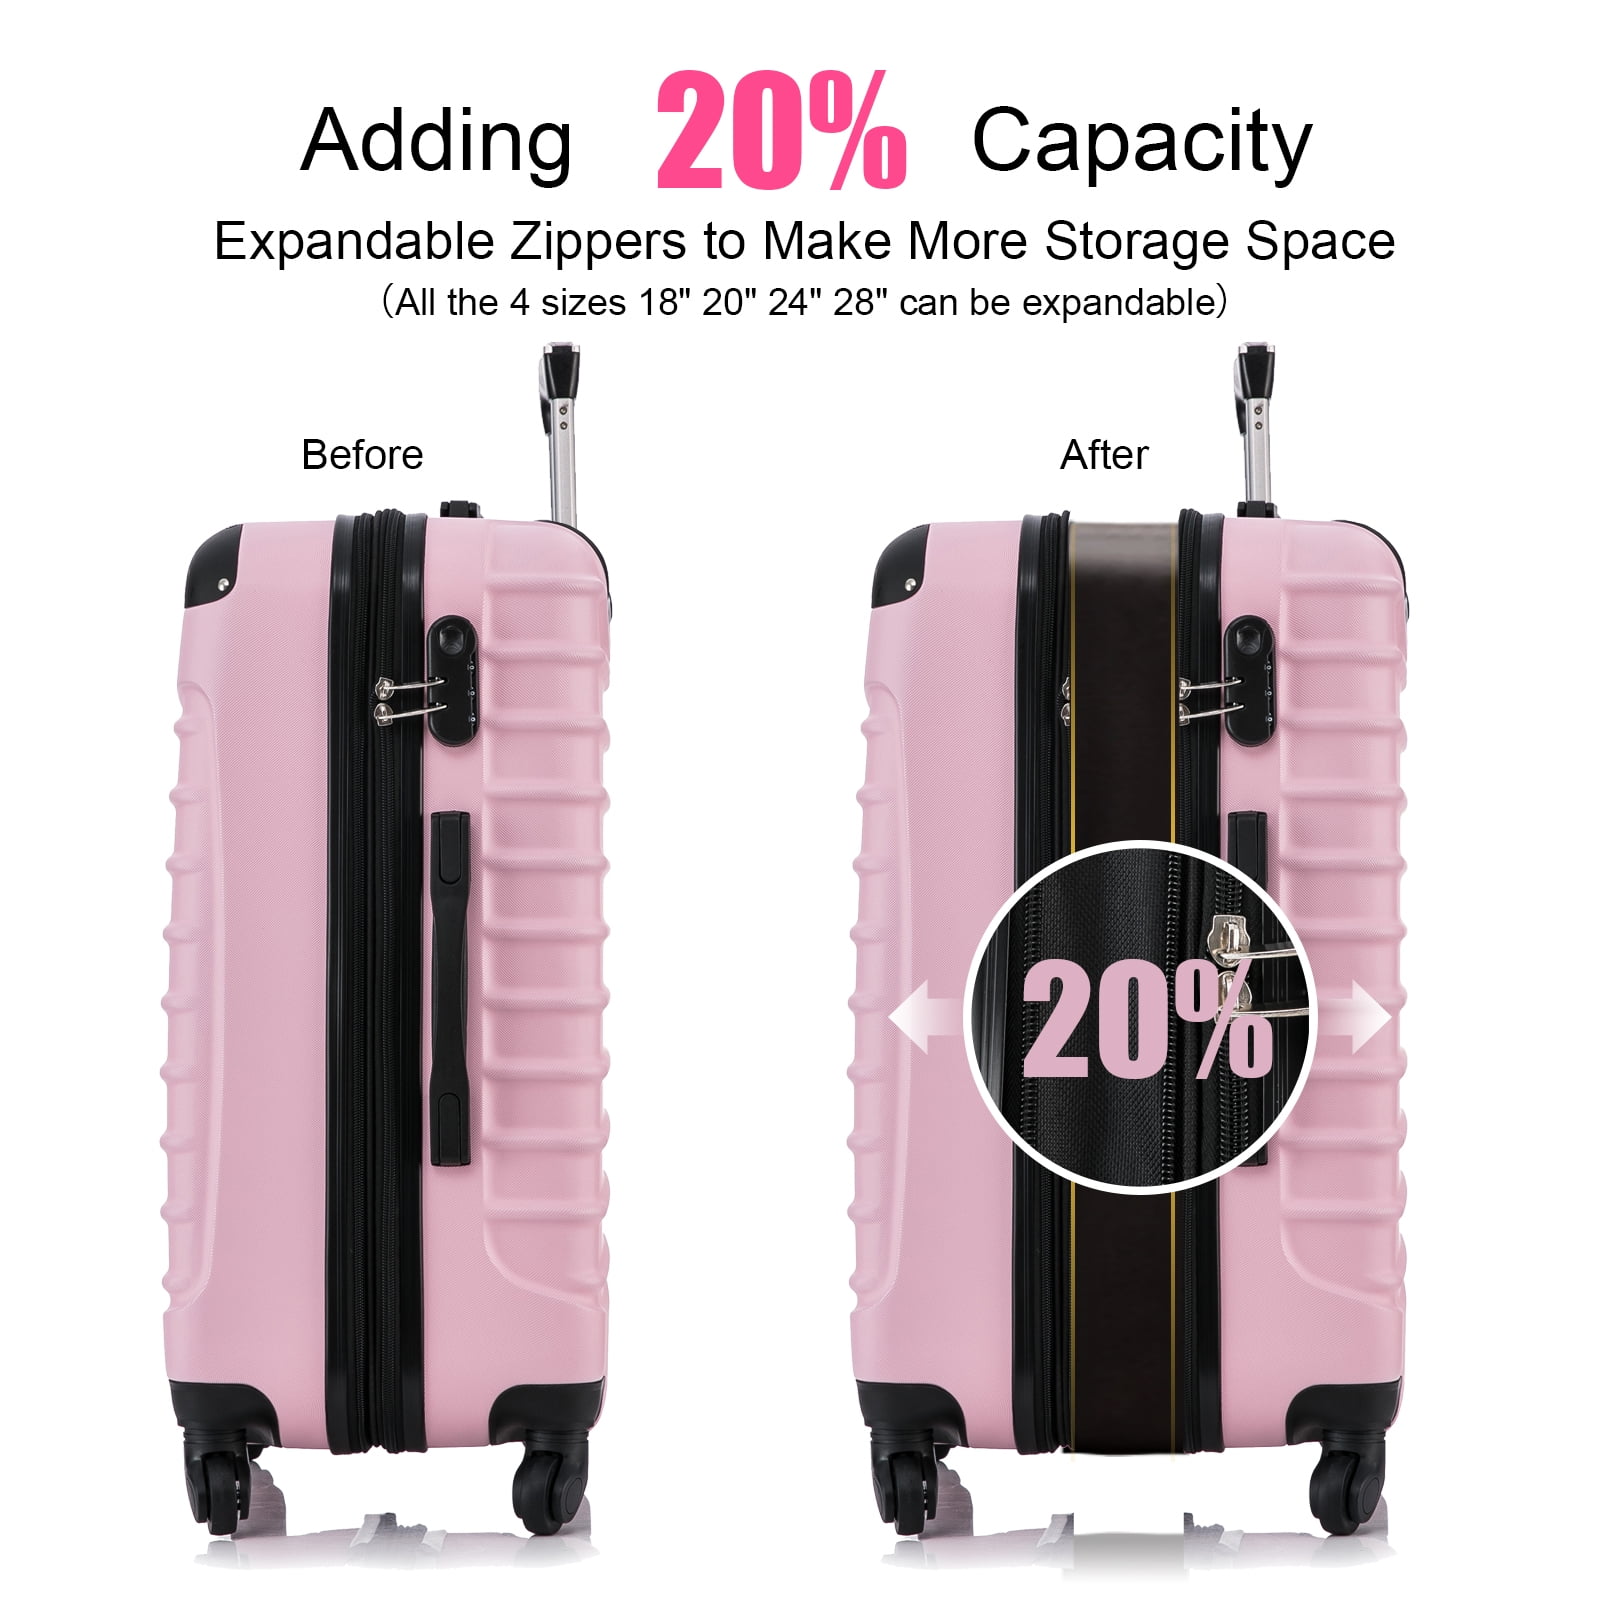 Adjustable Handle Hard Shell Suitcase 36L - Light Pink | Carry-On